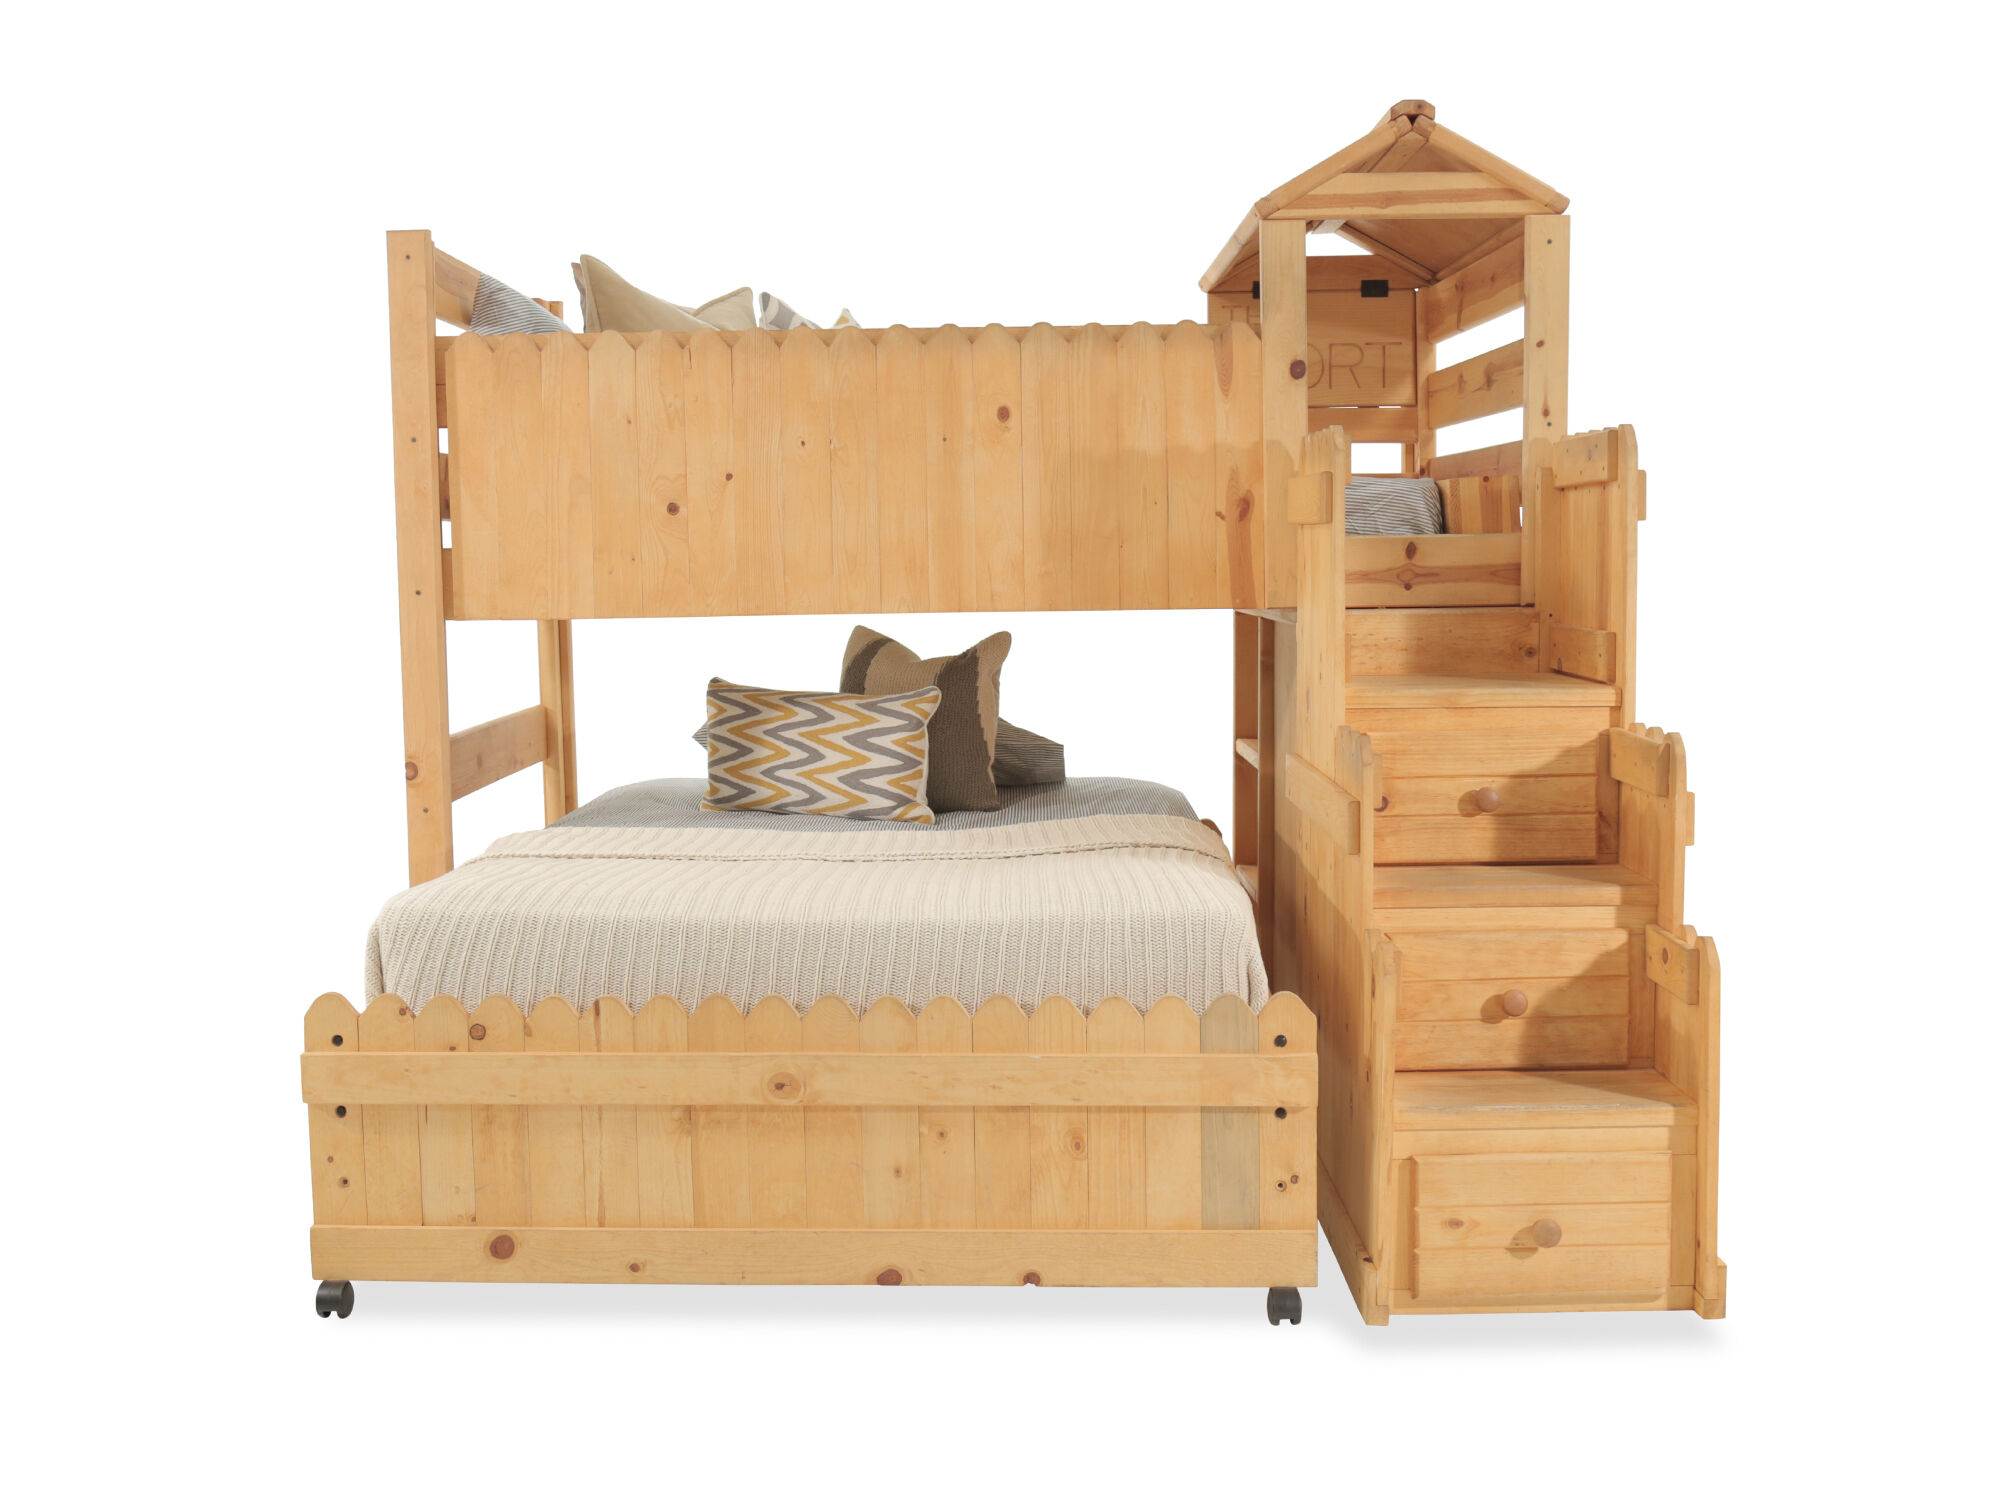 mathis brothers children's furniture